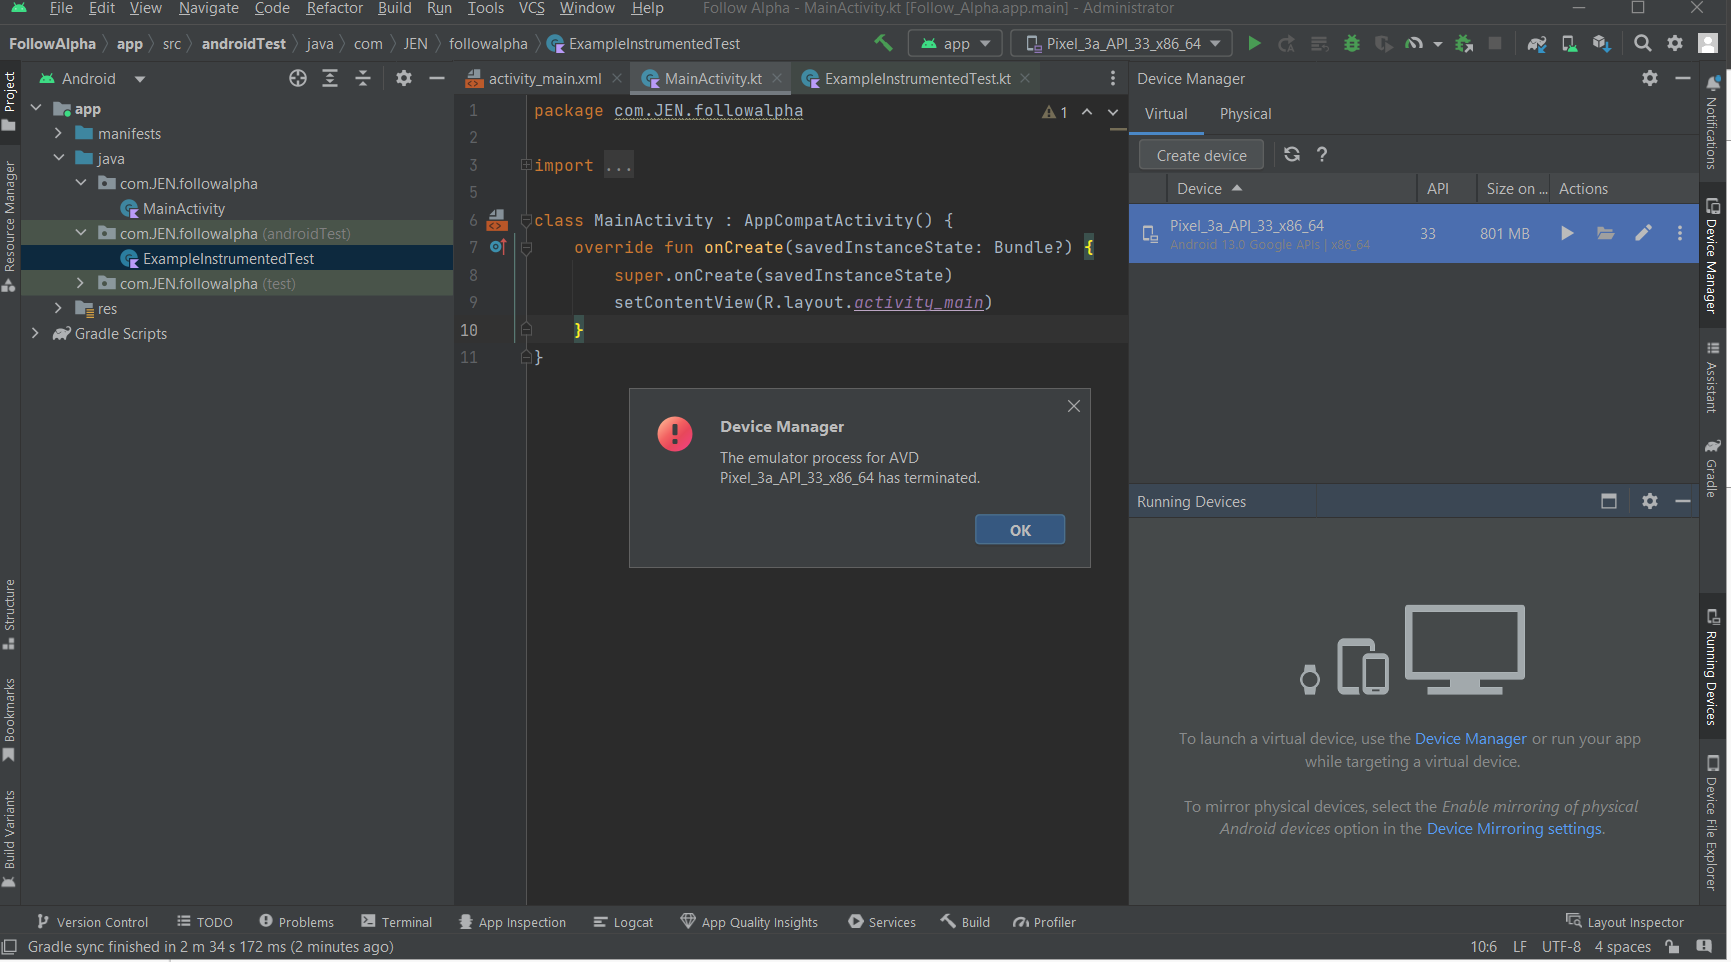 Nested Virtualization - Install Android Studio on Azure VM - Microsoft Q&A